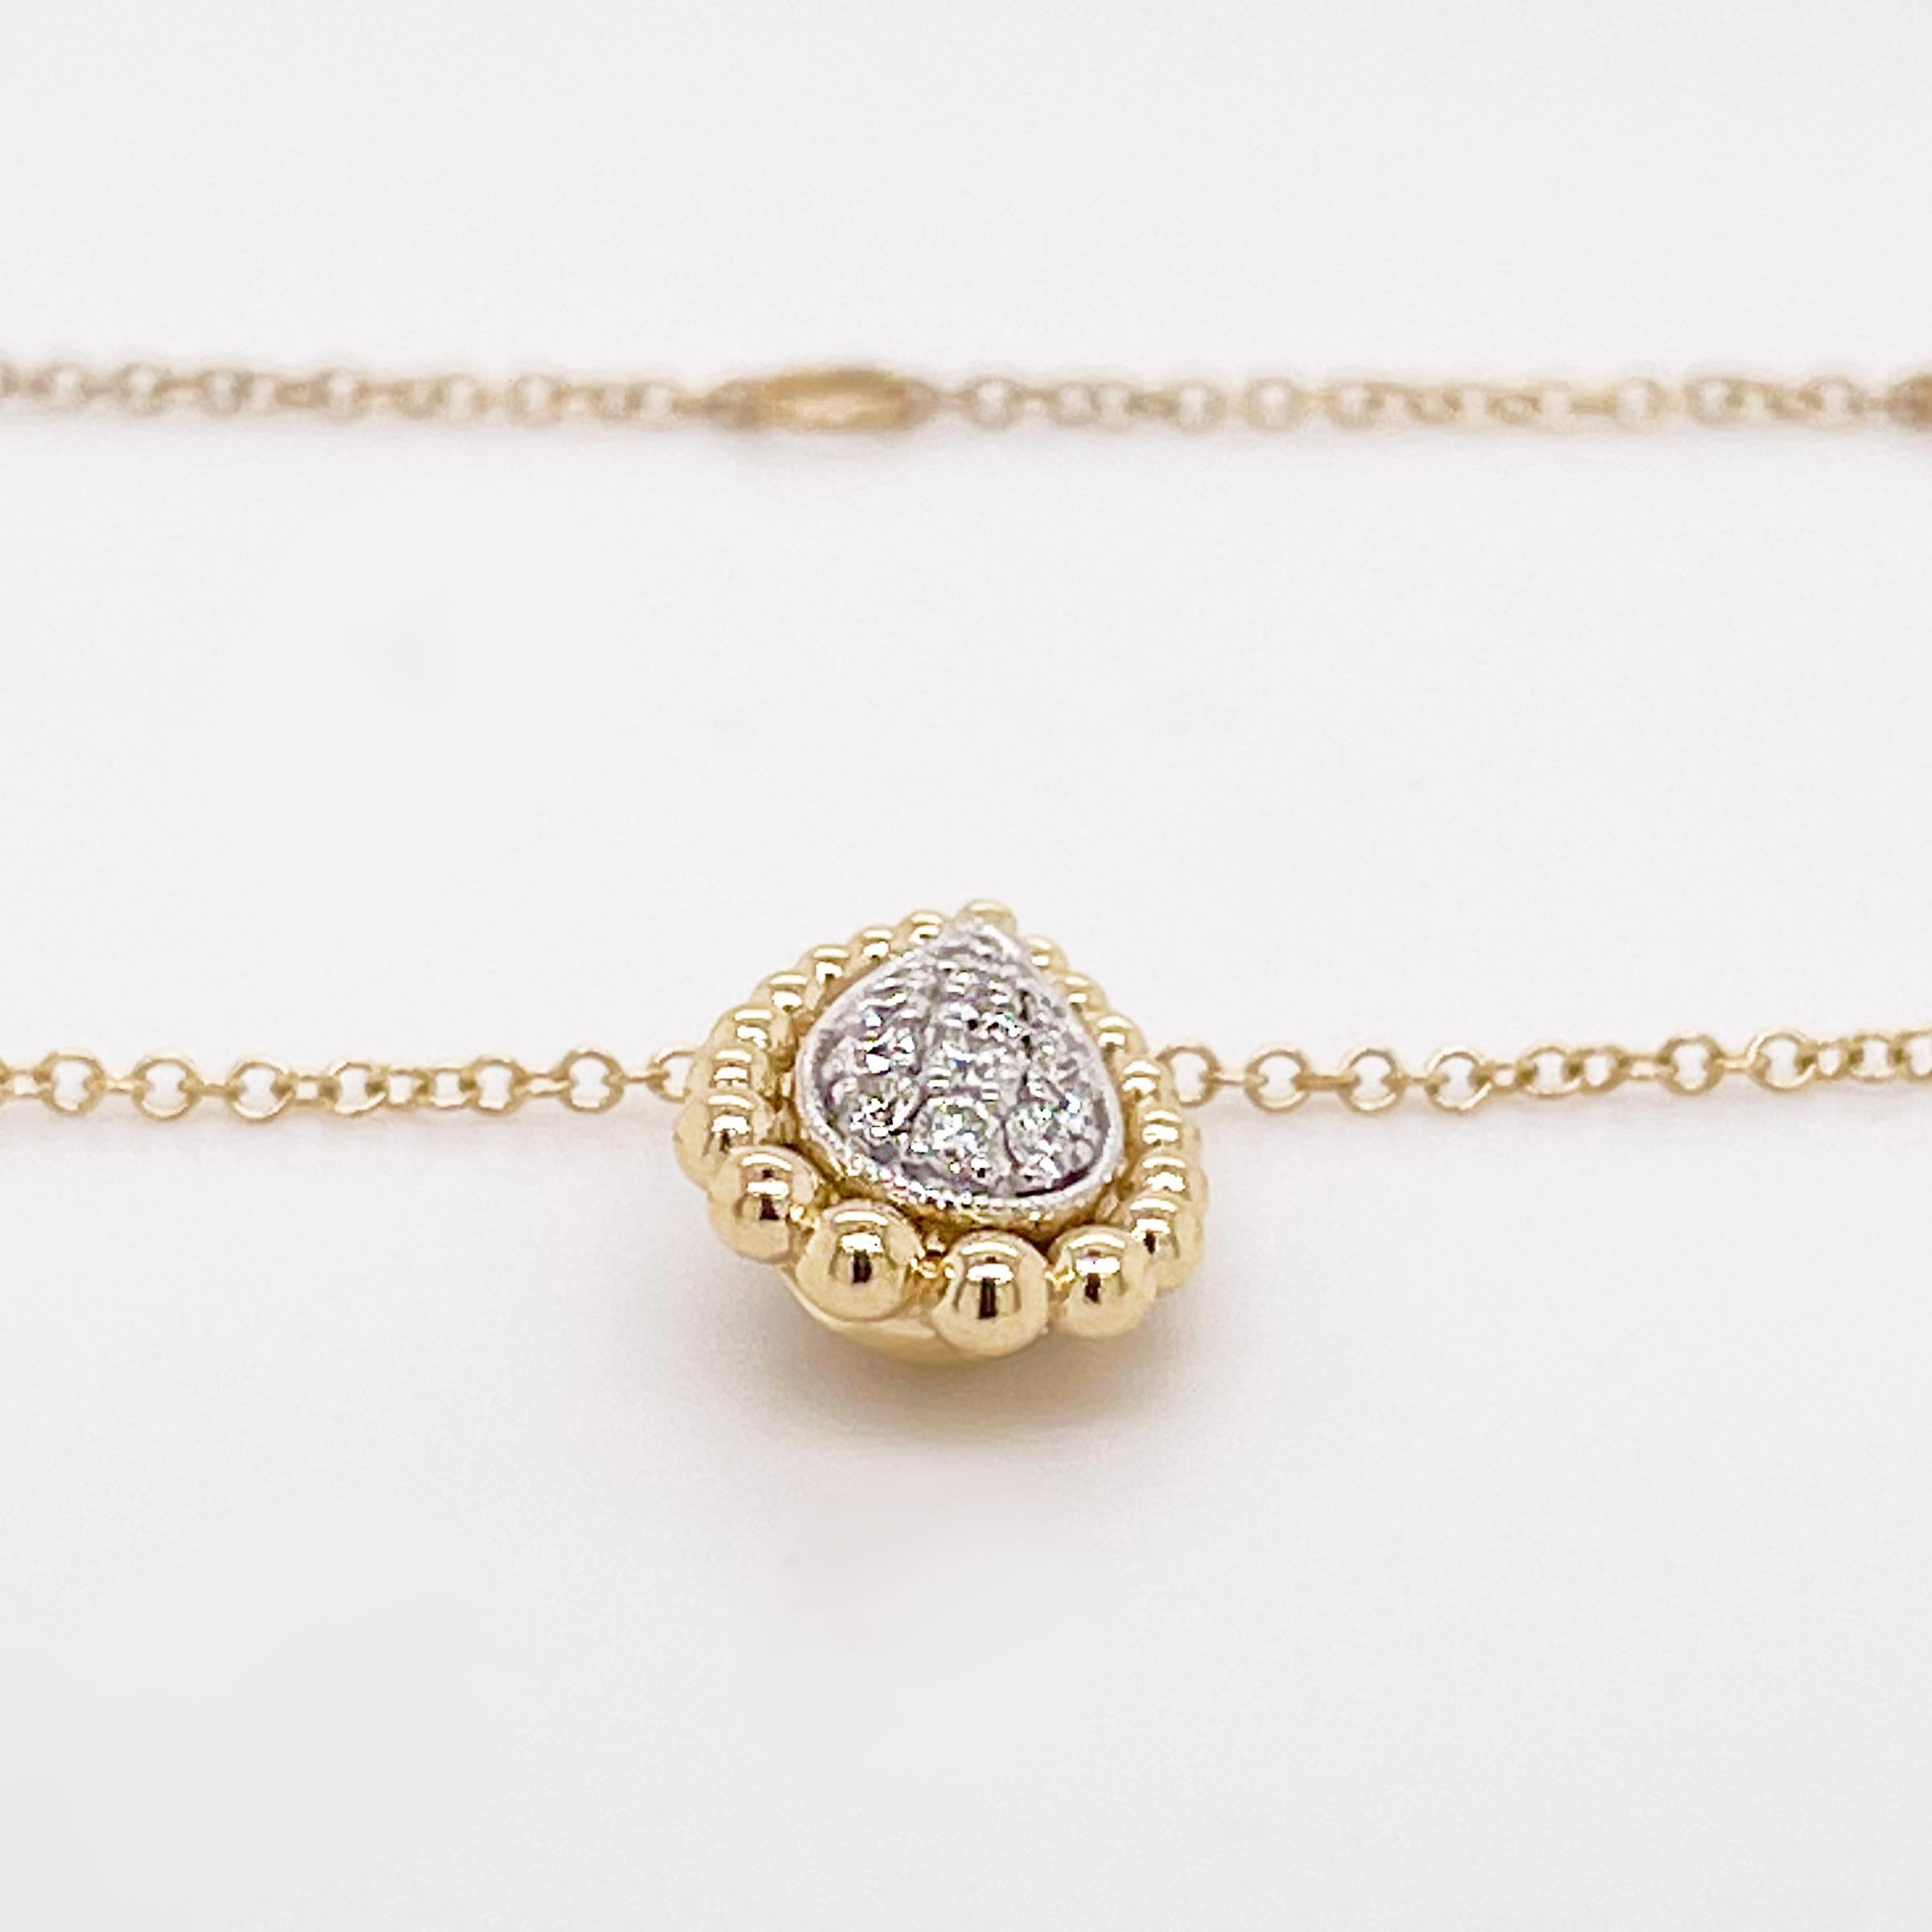 This beautiful pear shaped diamond necklace has pave set diamonds. The entire pear shape is set in 14 karat white gold and the beaded frame and chain is solid 14 karat yellow gold.  This is a mixed metal design that is desired by many. This is the